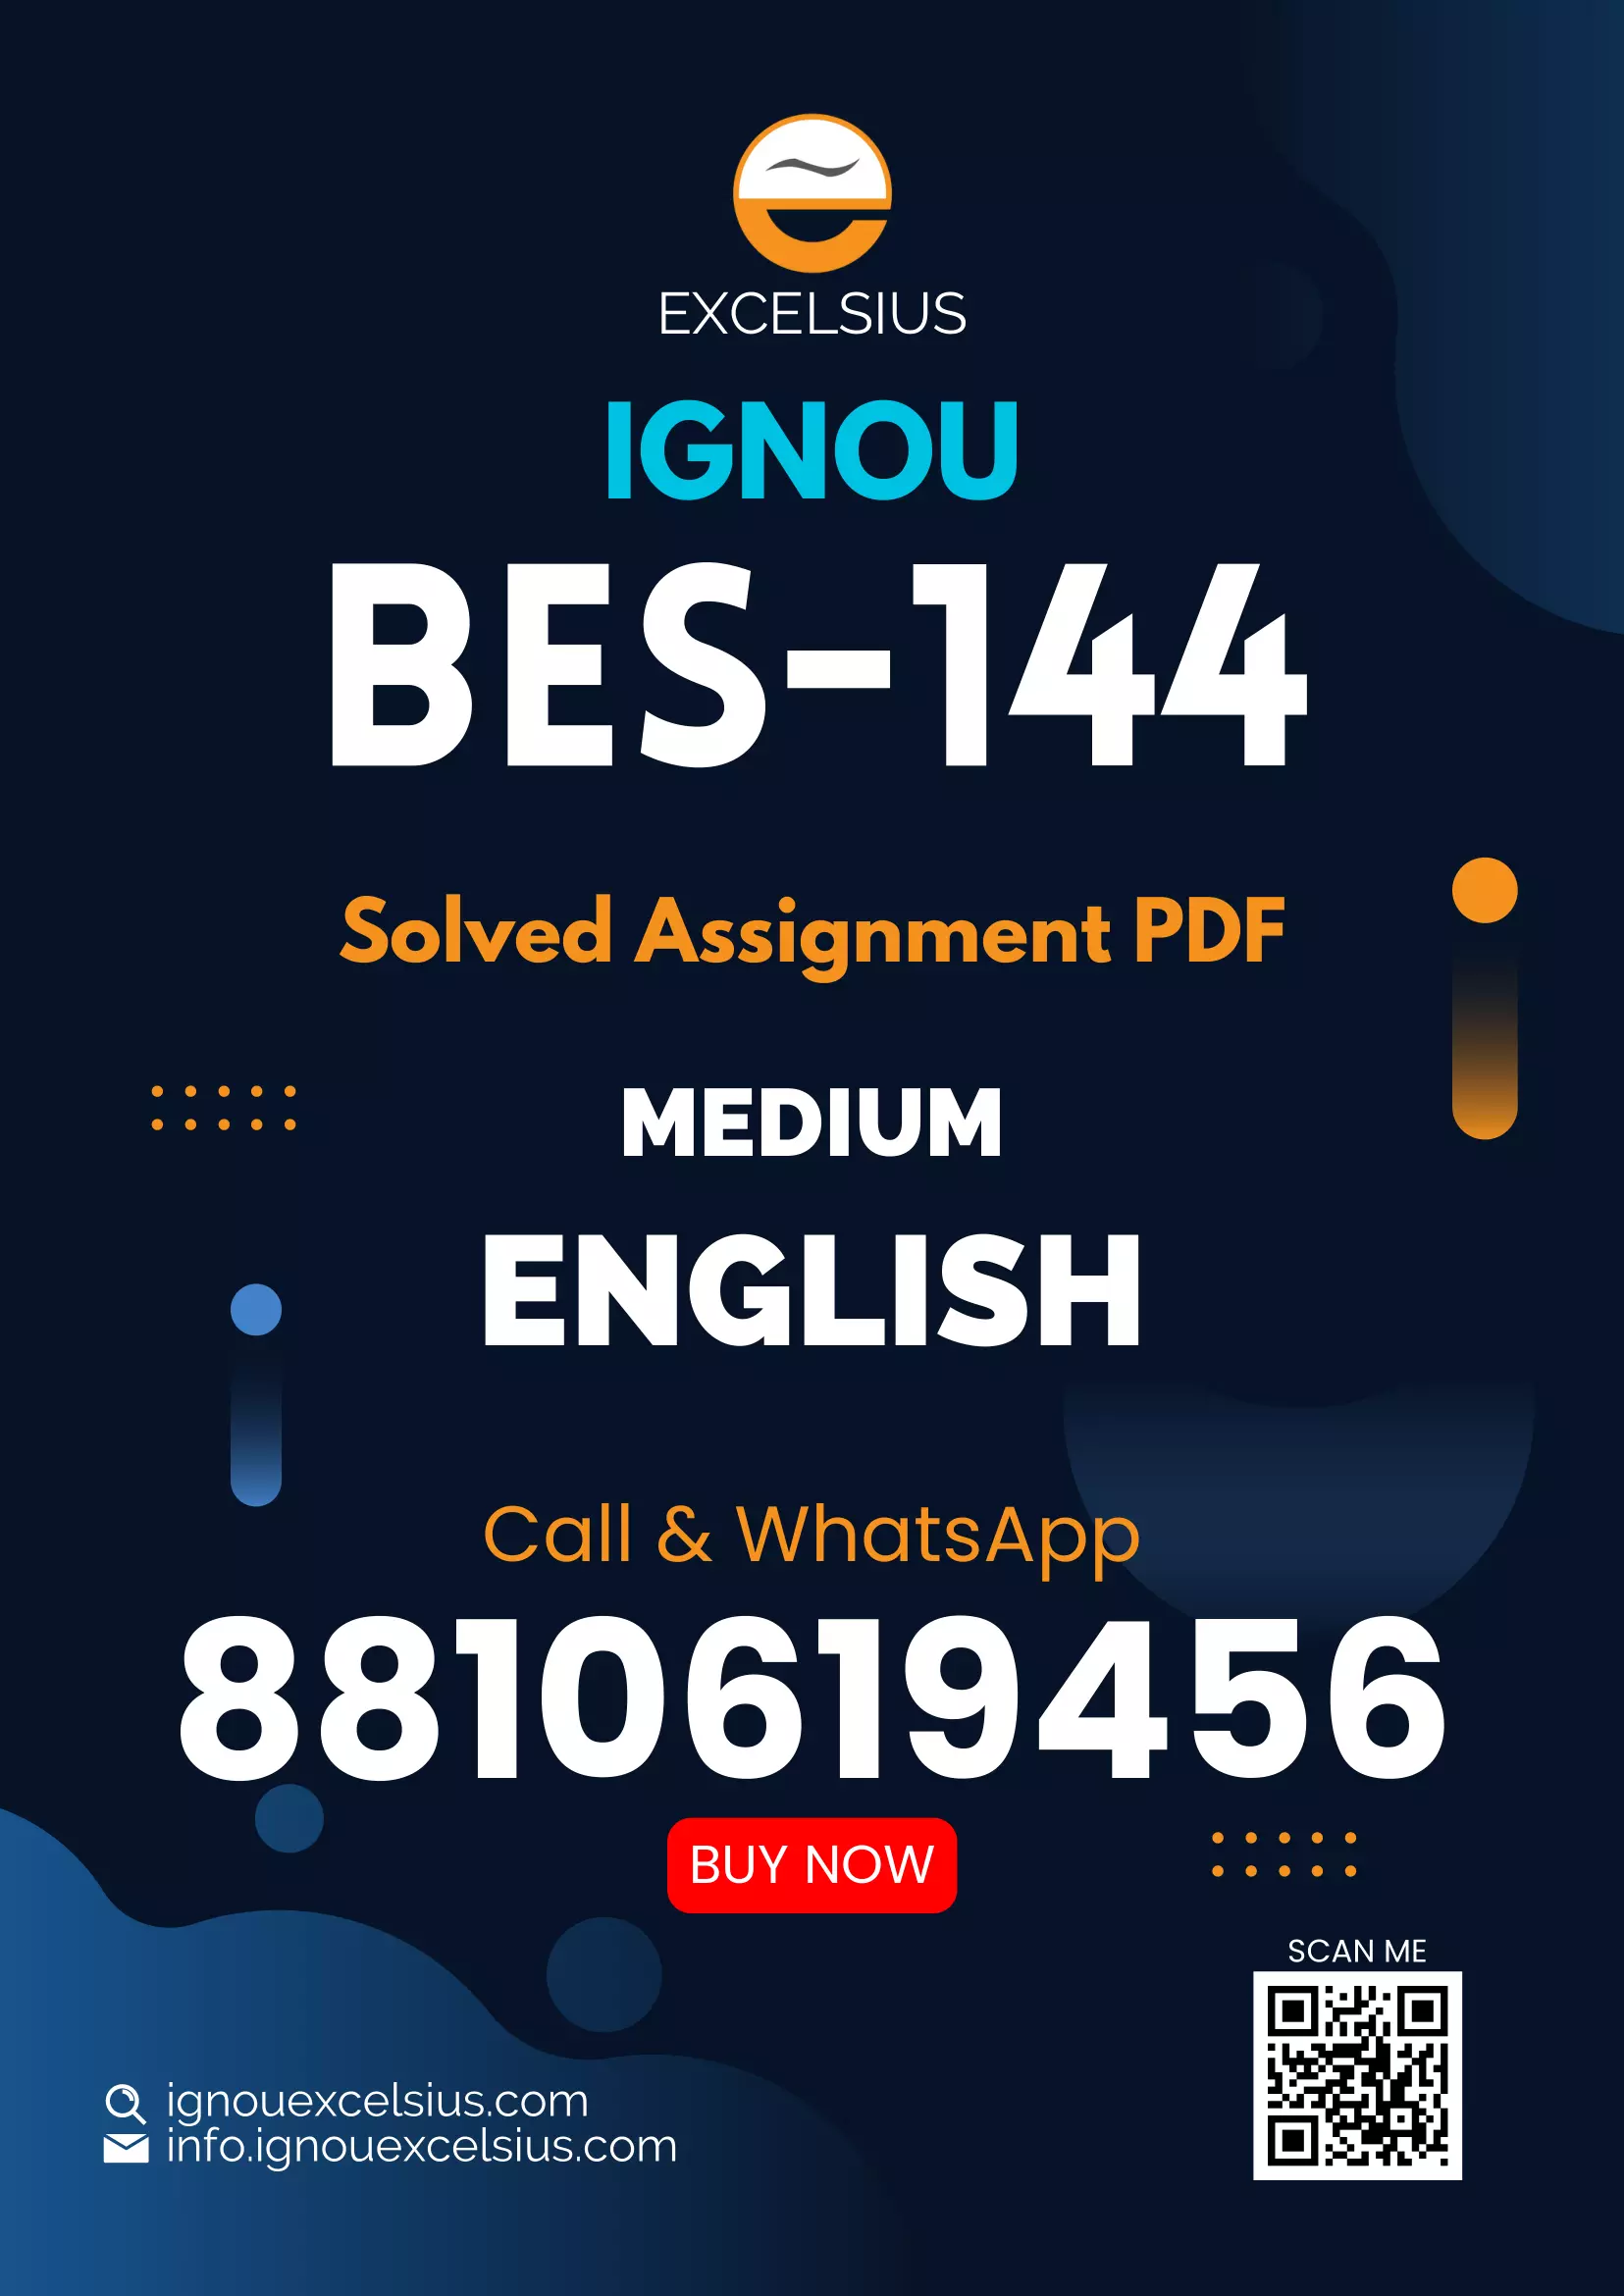 IGNOU BES-144 - Pedagogy of English, Latest Solved Assignment-January 2021 - July 2021